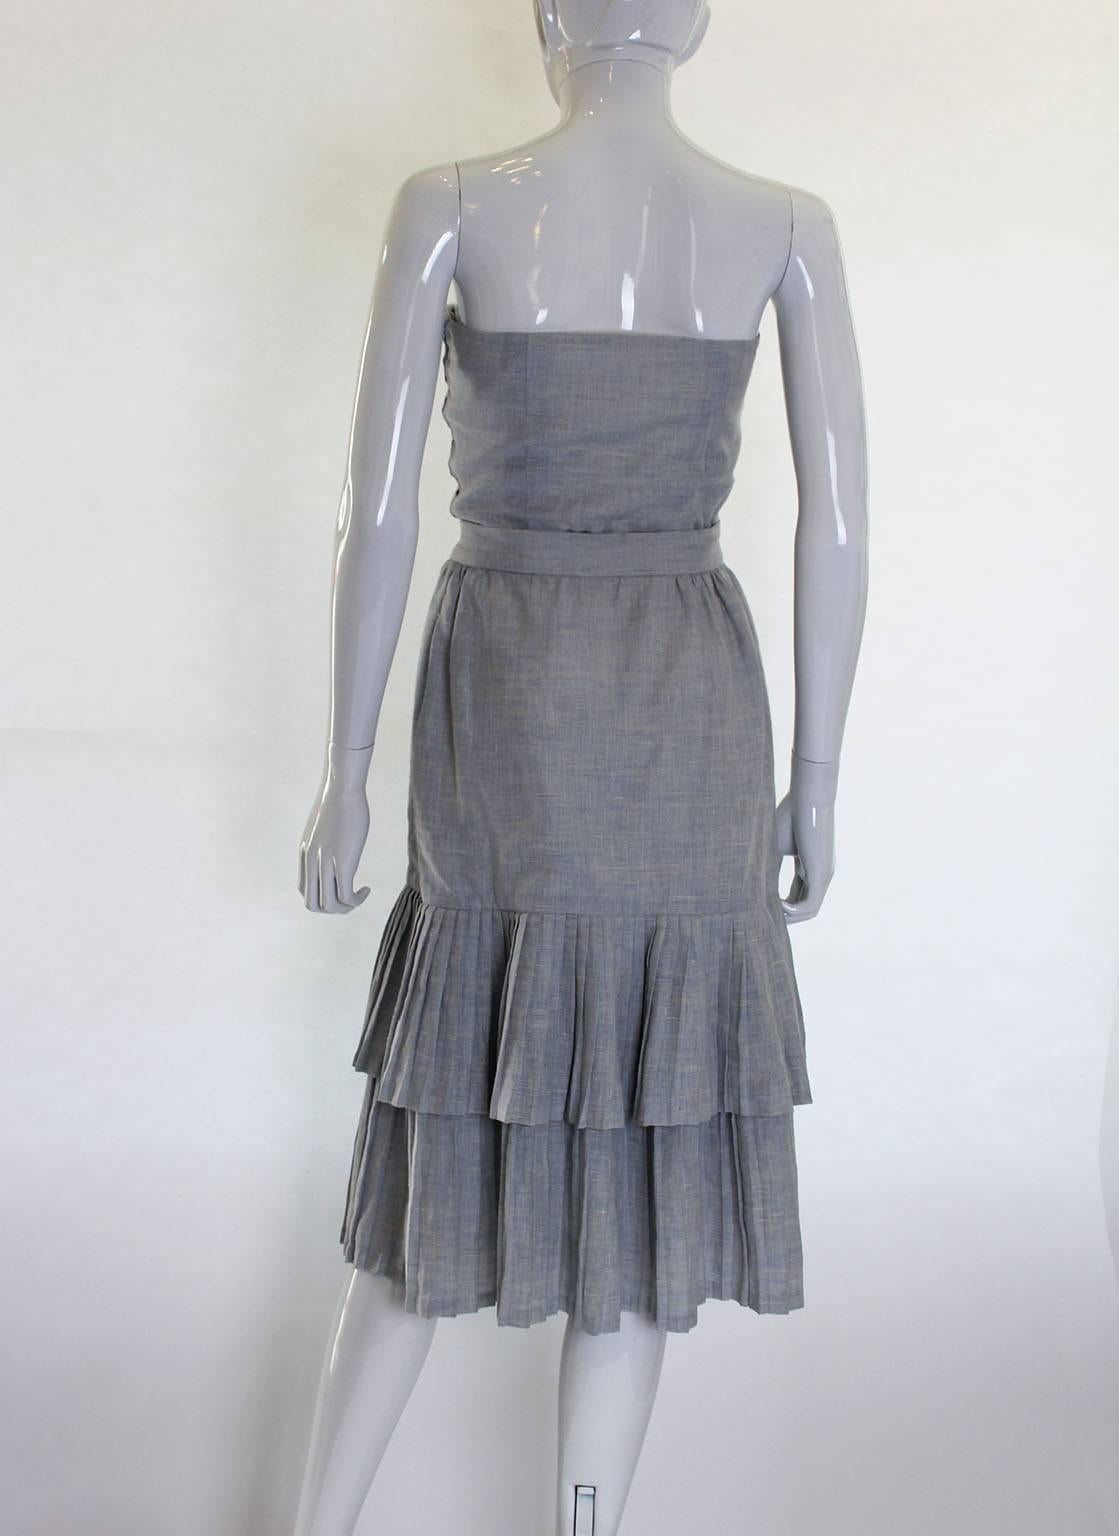 Gray Striking  Skirt and Bustier by Lanvin Paris.